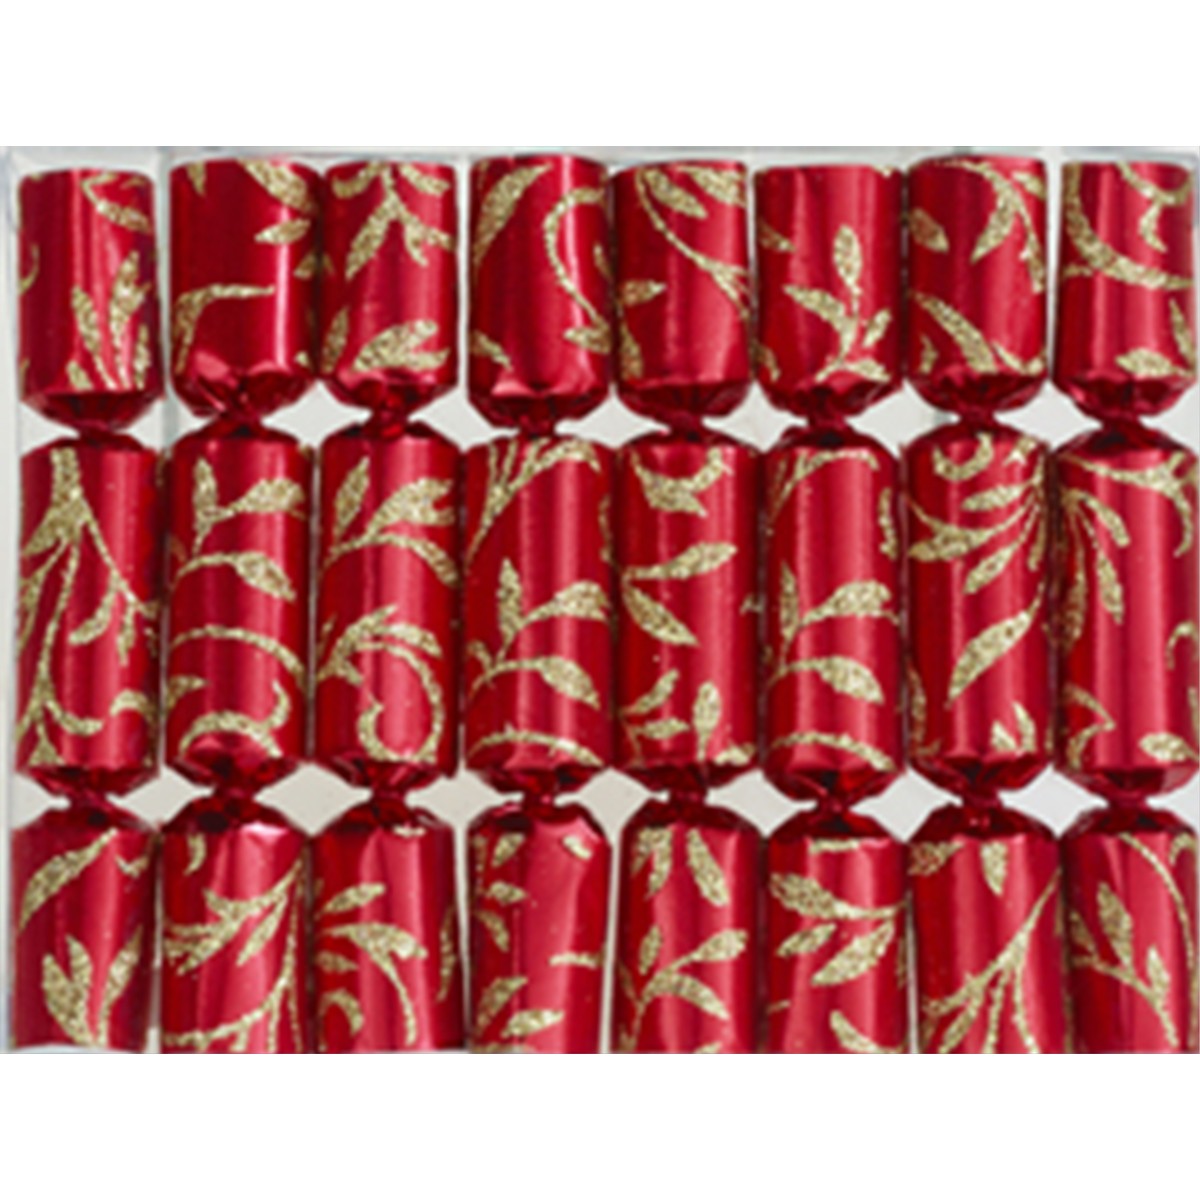  Robin Reed Crackers Red Floral glitter boite de 8 pièces  15cm